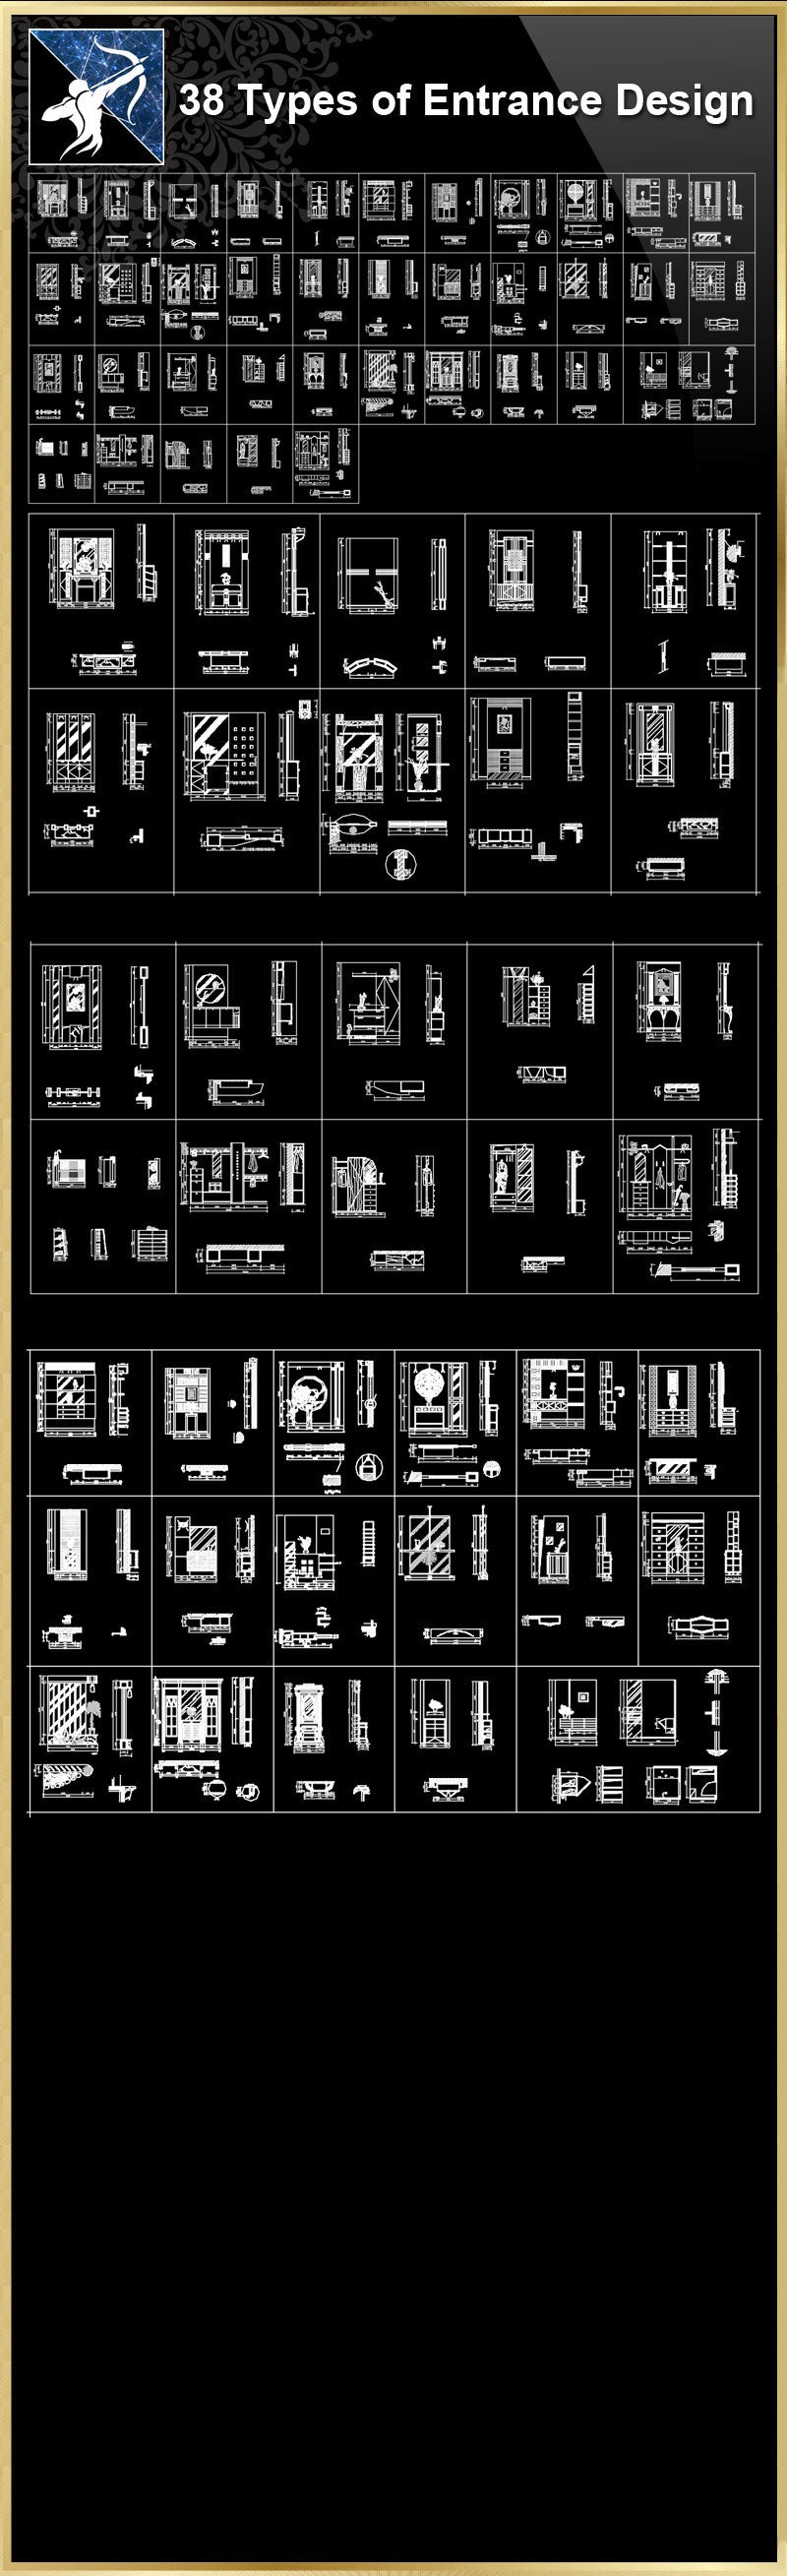 ★【38 Types of Entrance Design CAD Drawings】